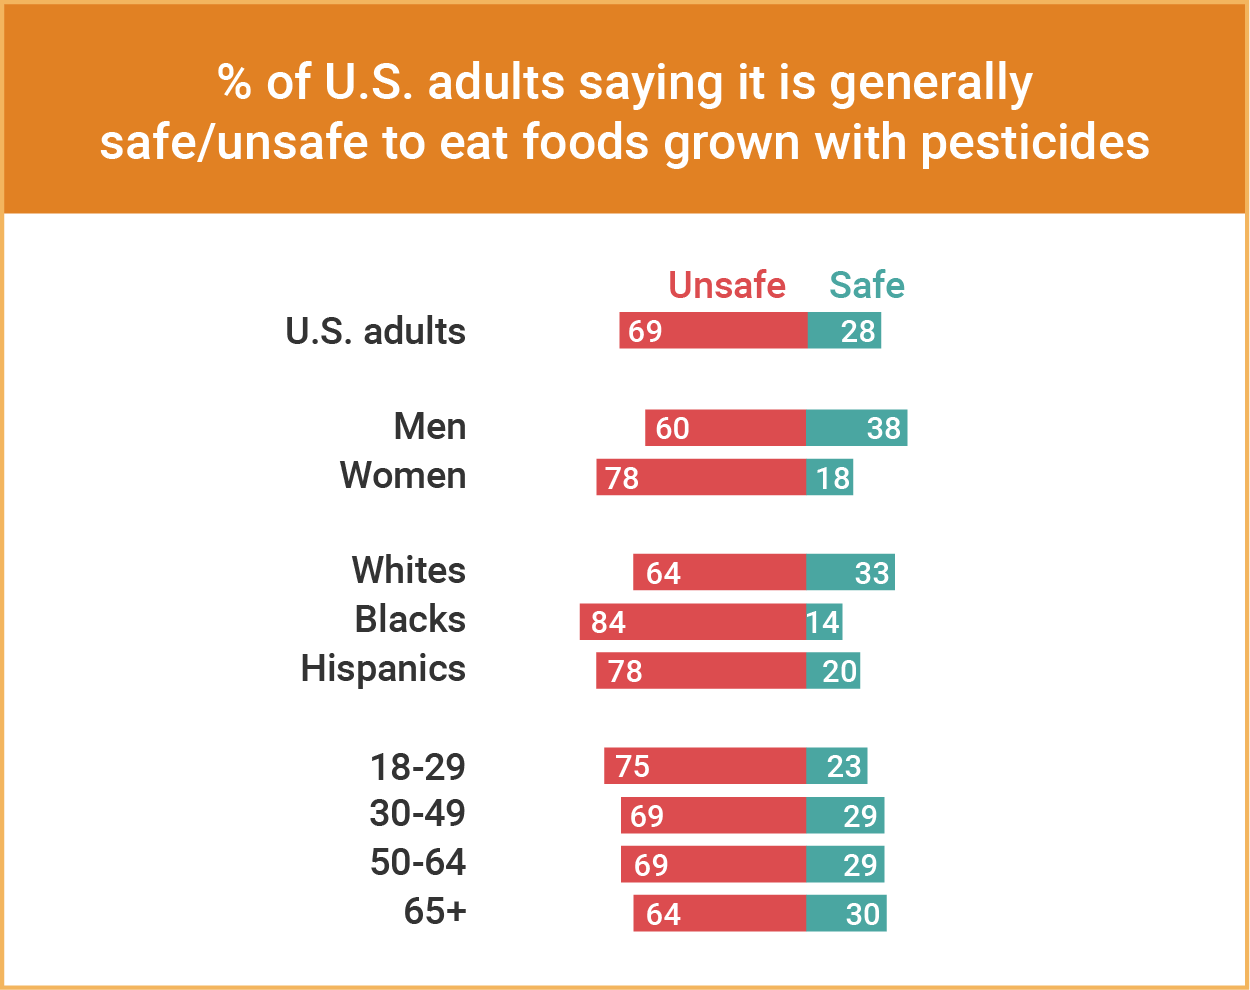 A graph showing the percentage of U.S. adults that say it is safe or unsafe to eat foods grown with pesticides, broken down into various categories.